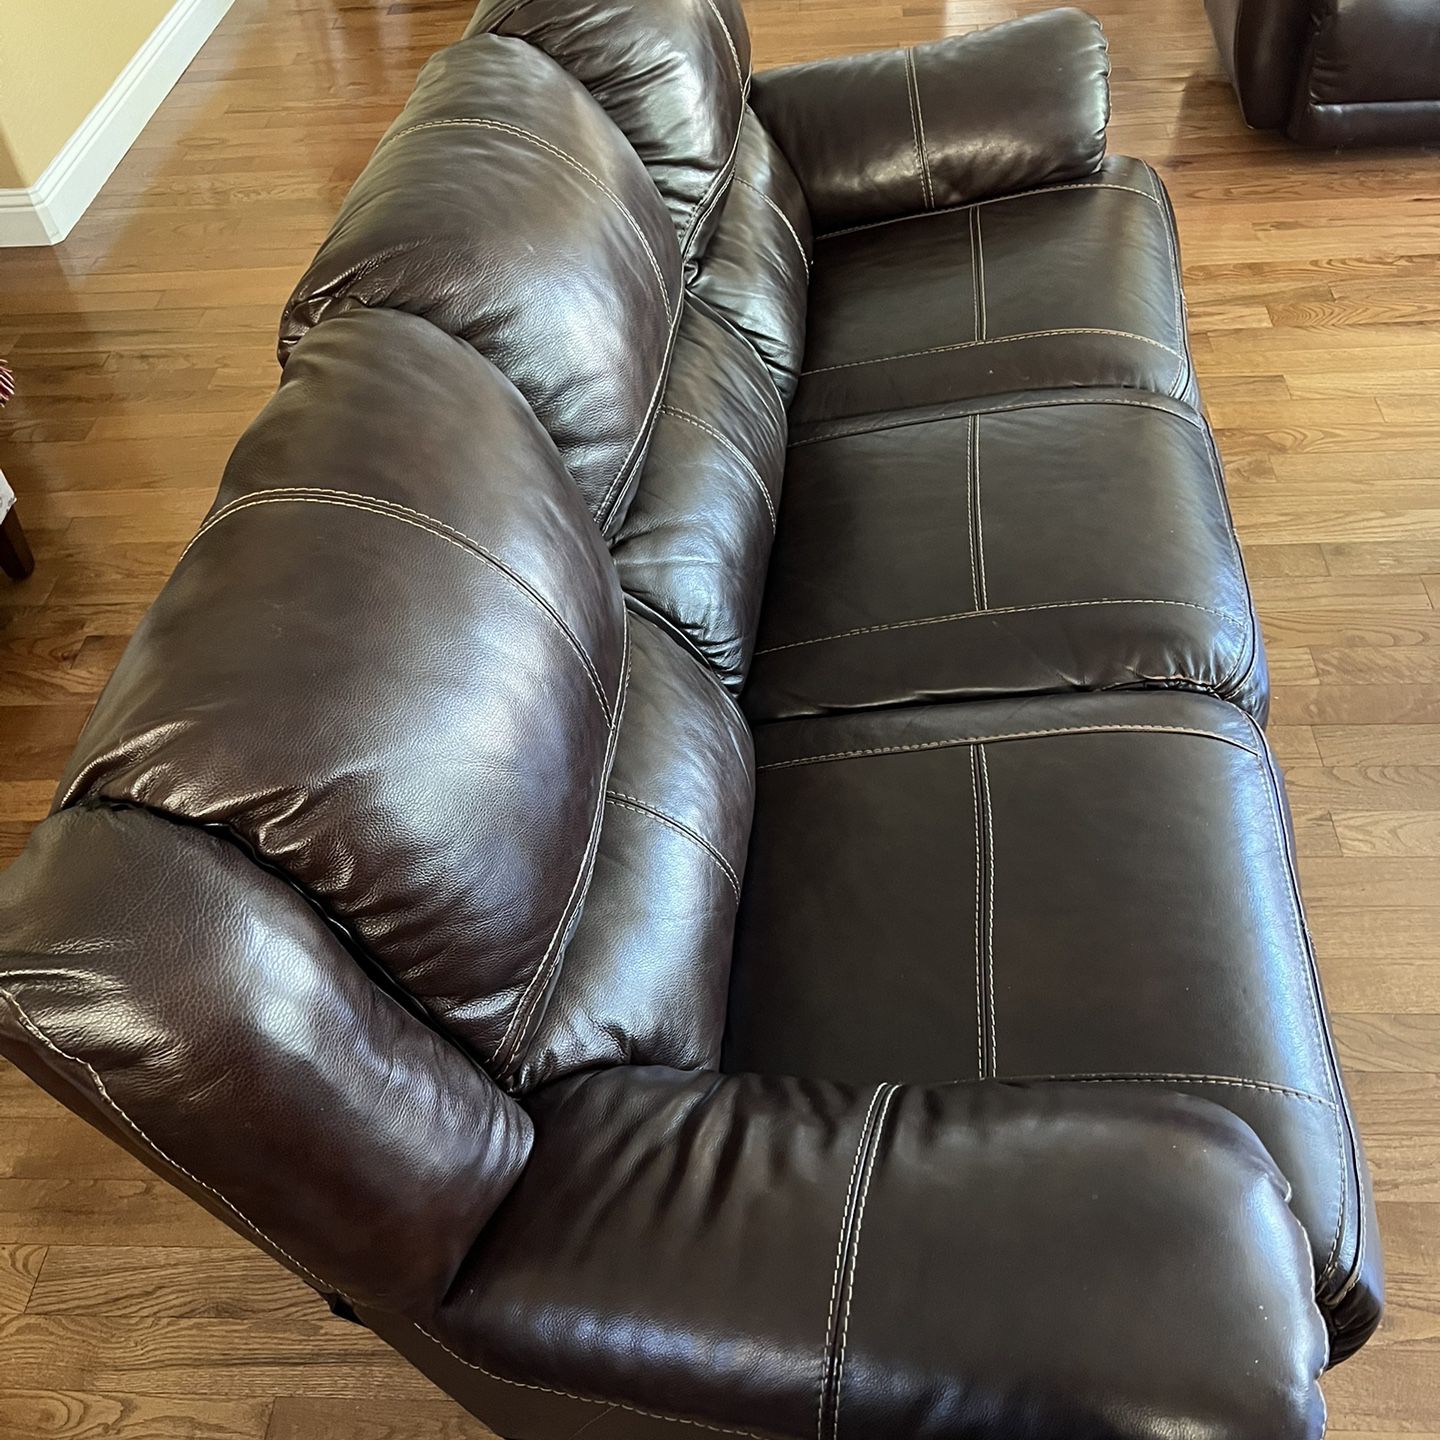 3 Couches -   Brown Leather 2 Sofa And Loveseat  Power Recliner 